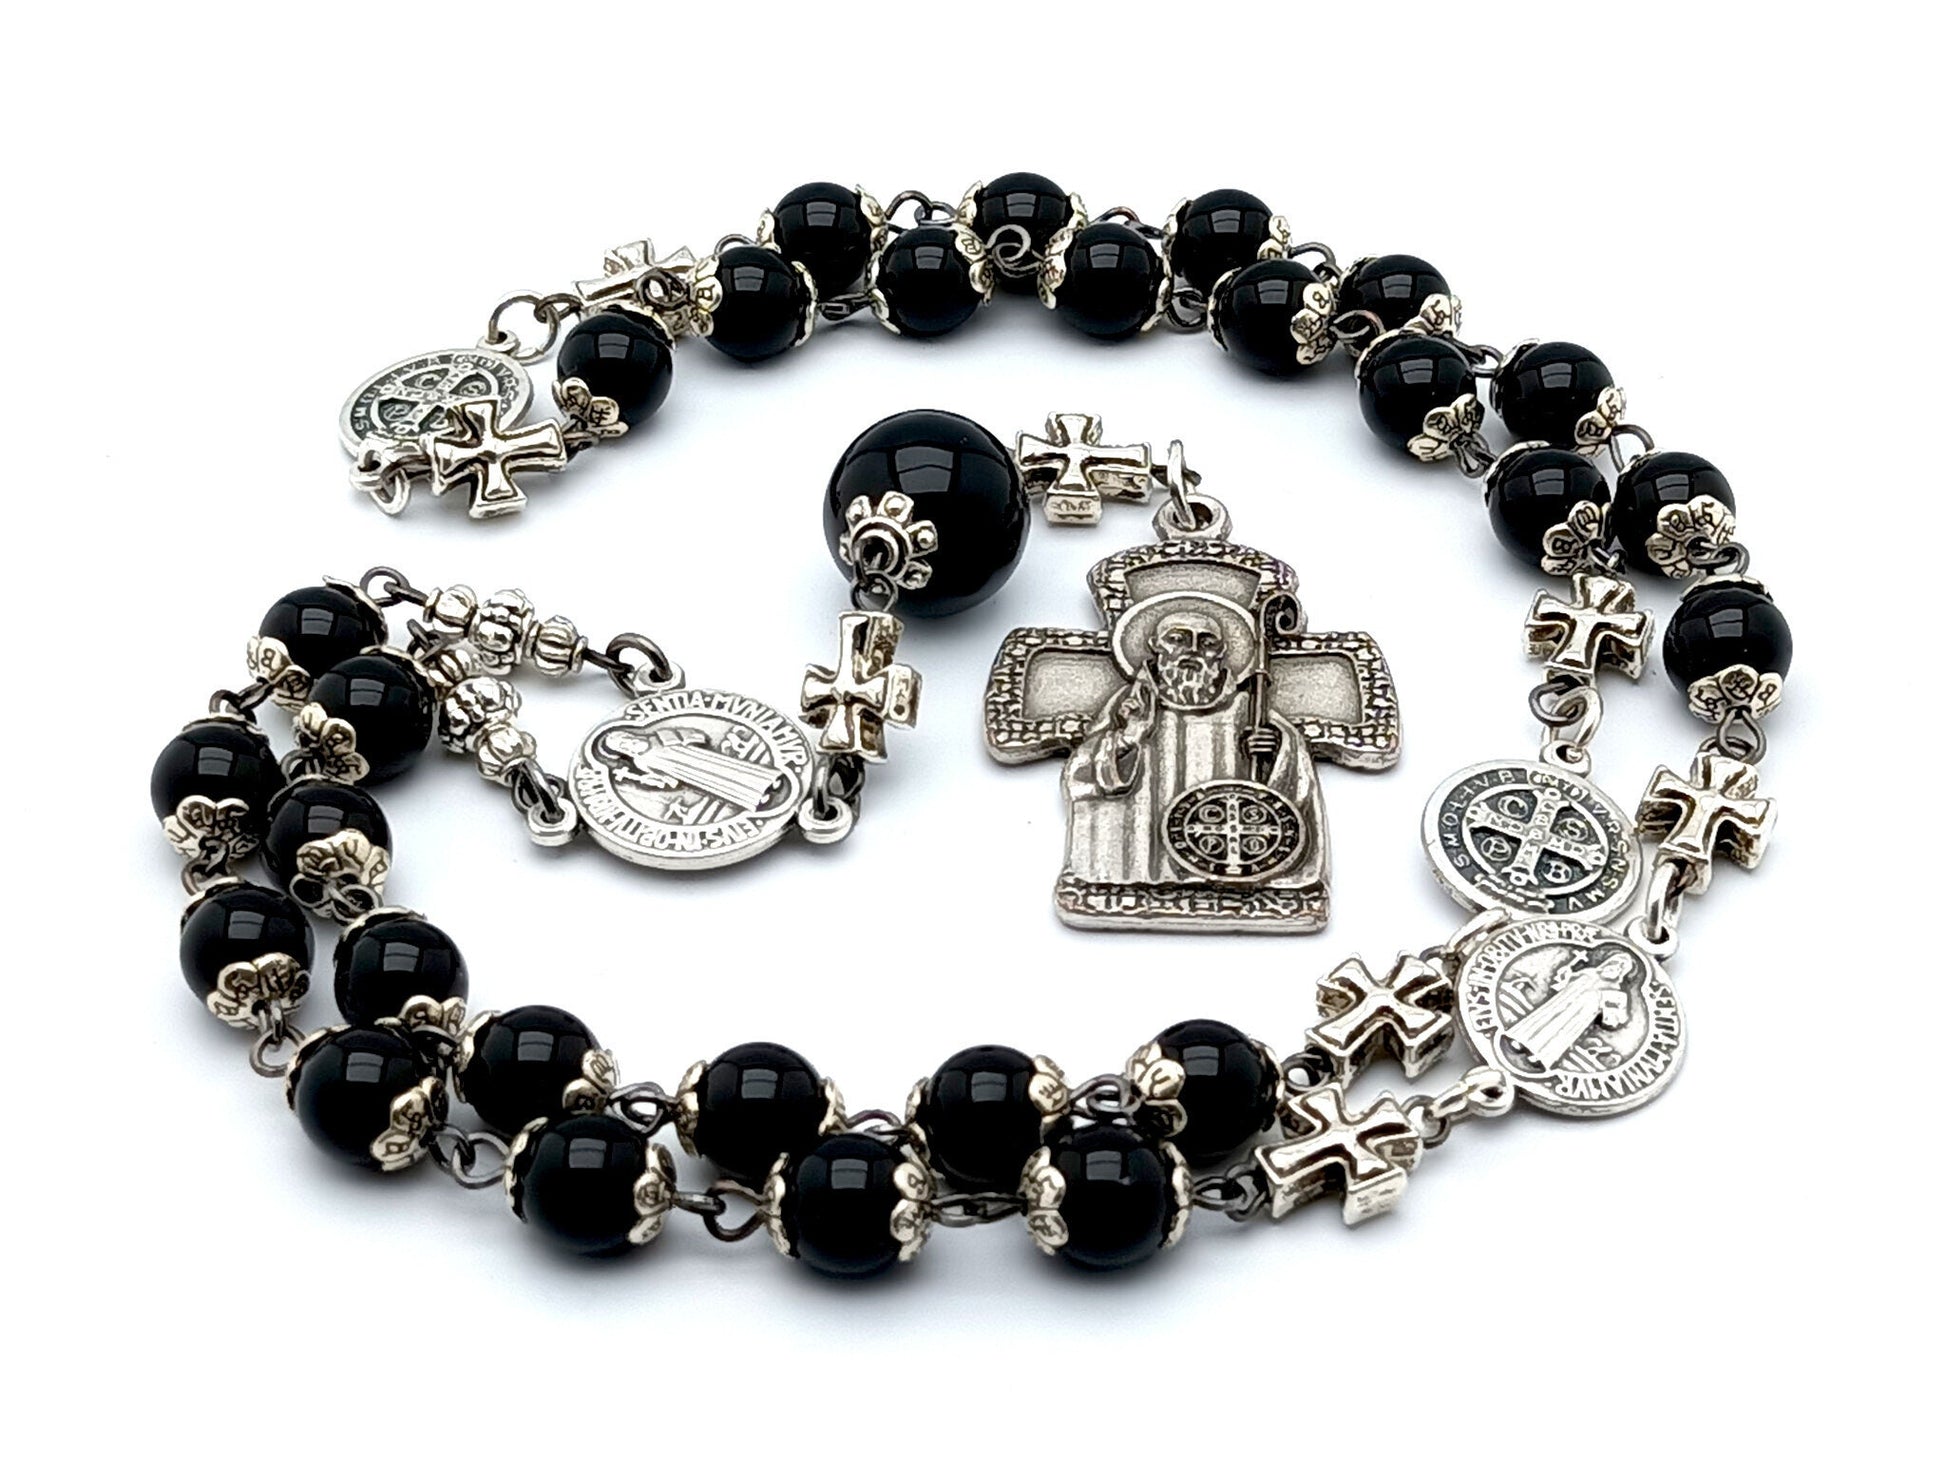 Saint Benedict unique rosary beads prayer chapet with onyx gemstone beads, silver Benedict medals and protector medal.